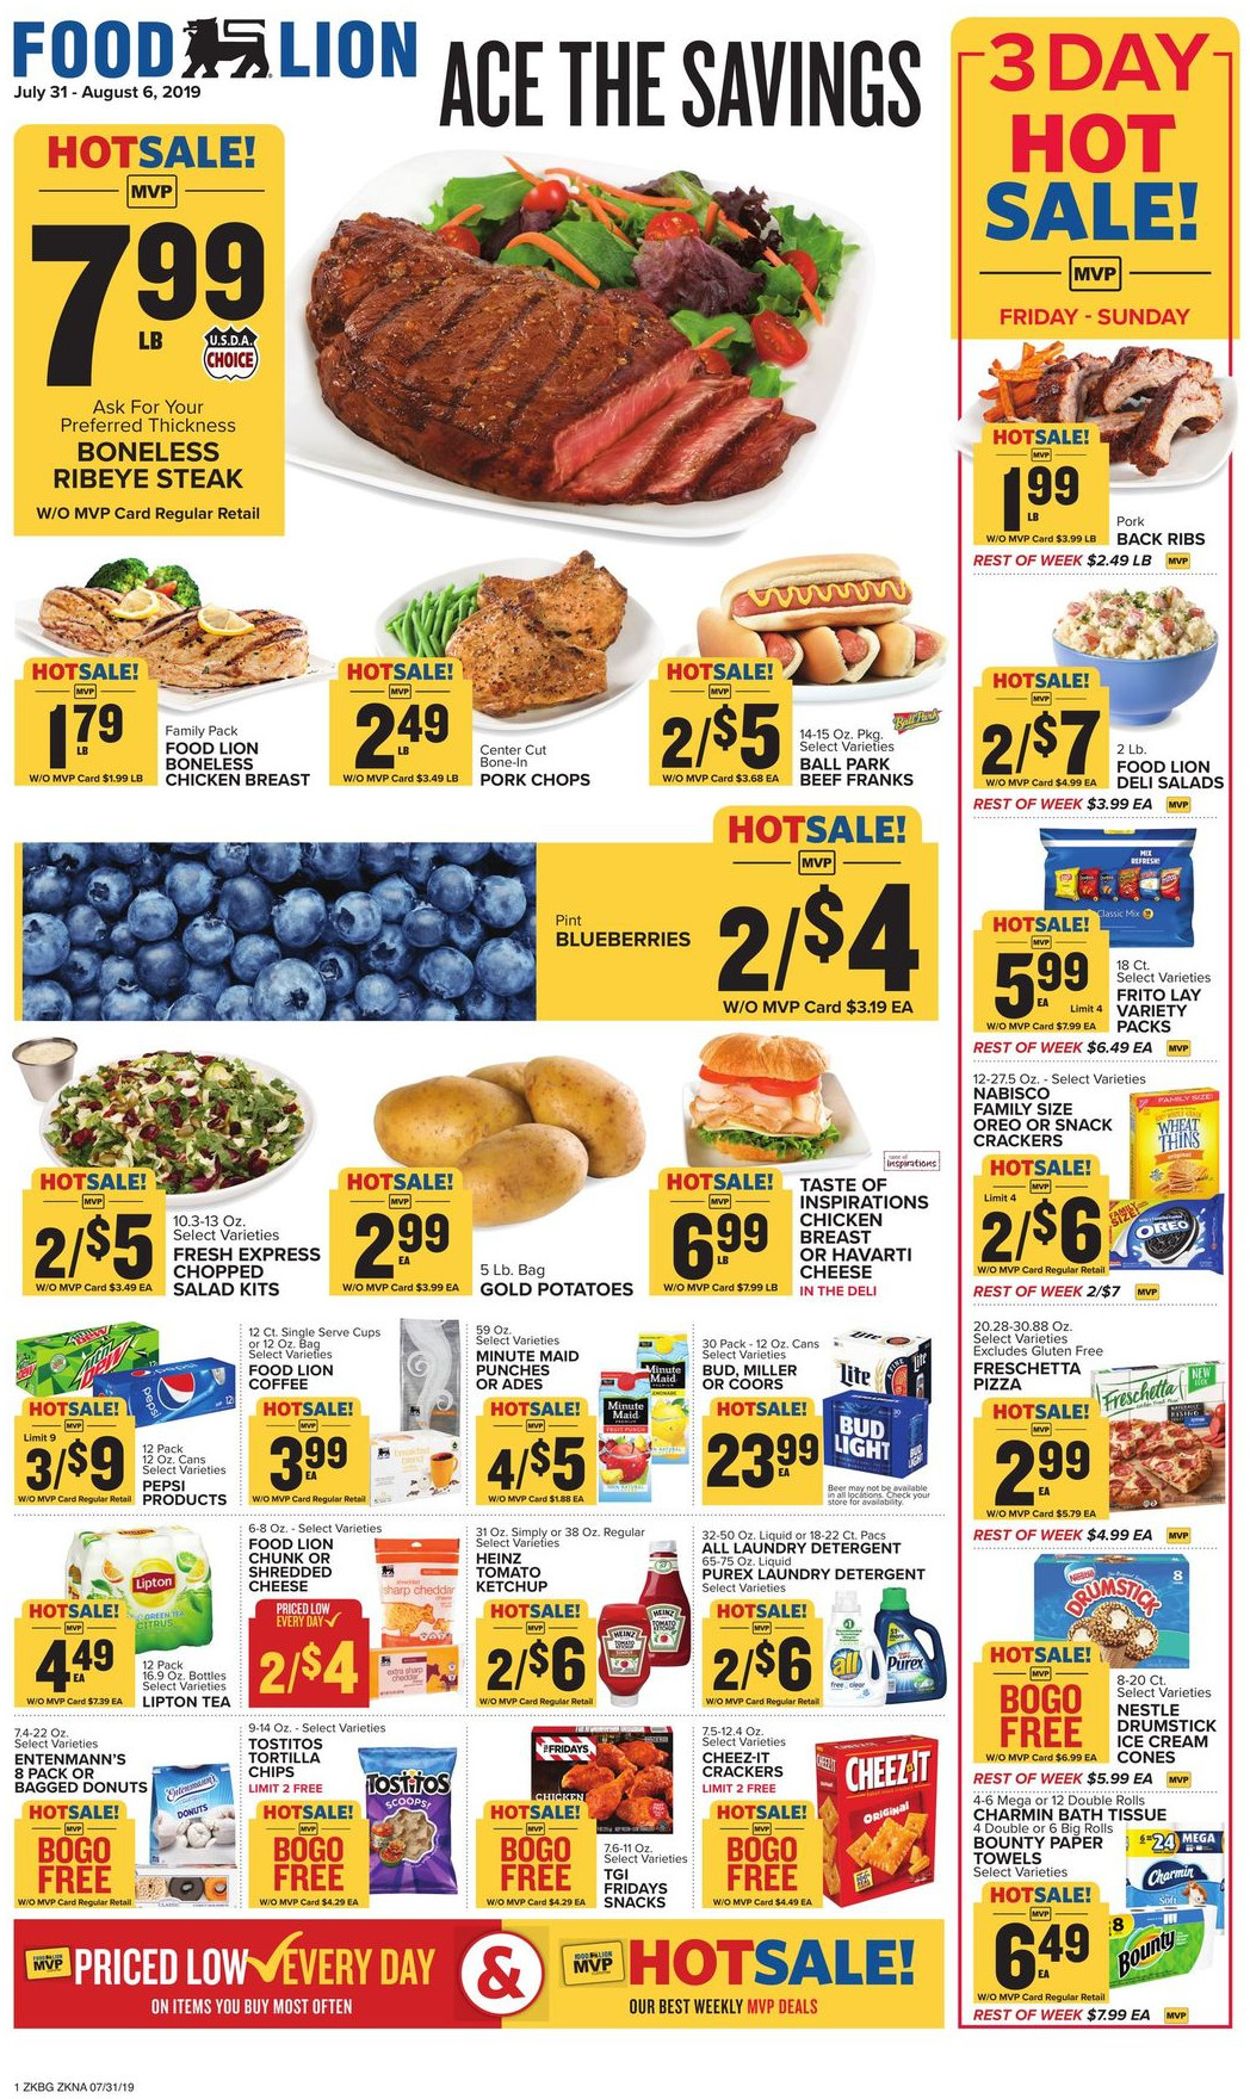 Food Lion Current weekly ad 07/31 - 08/06/2019 - frequent-ads.com